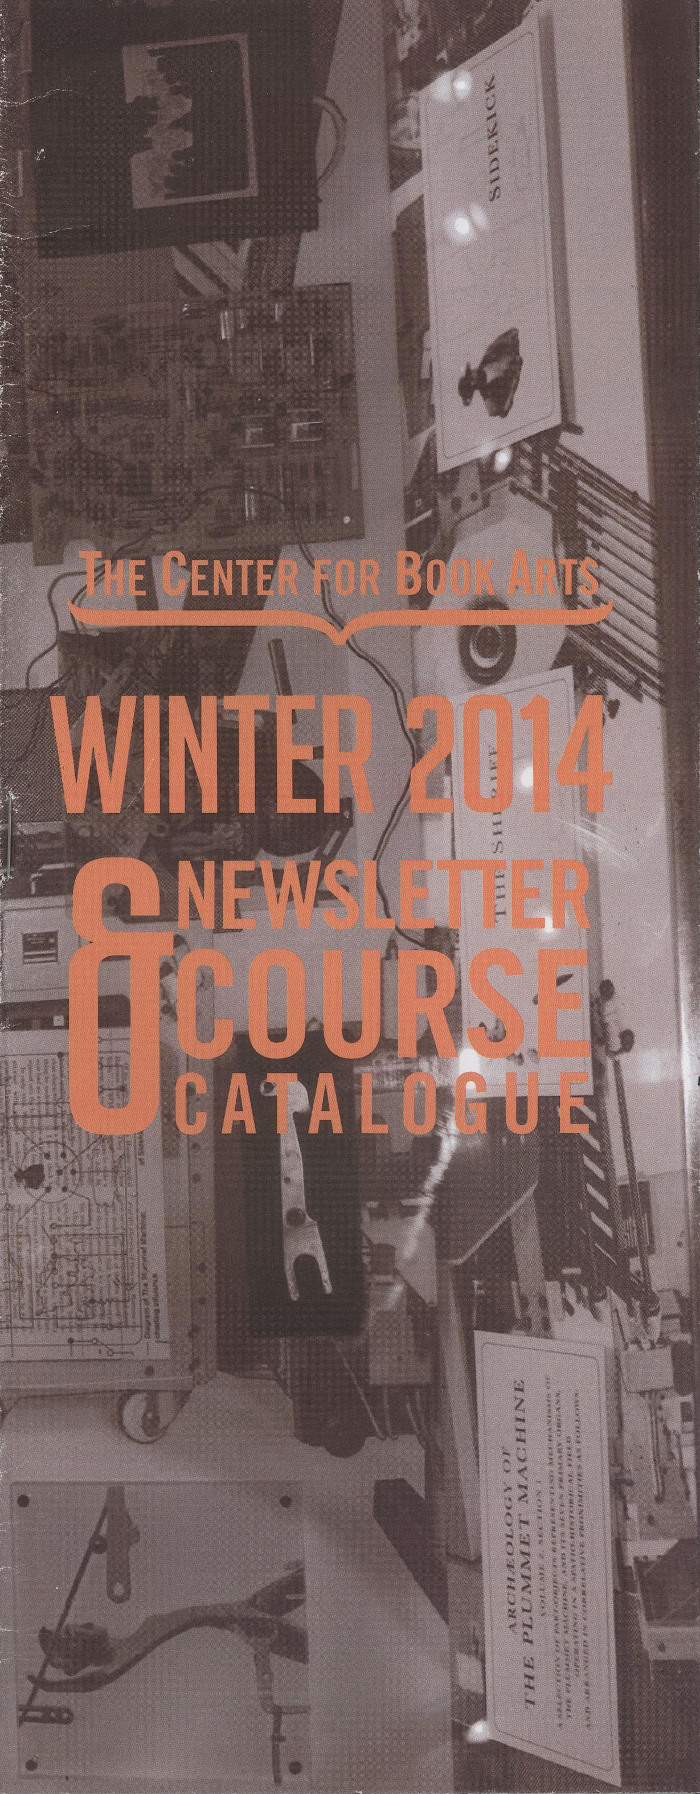 Winter 2014 Center for Book Arts' newsletter and course catalogue
